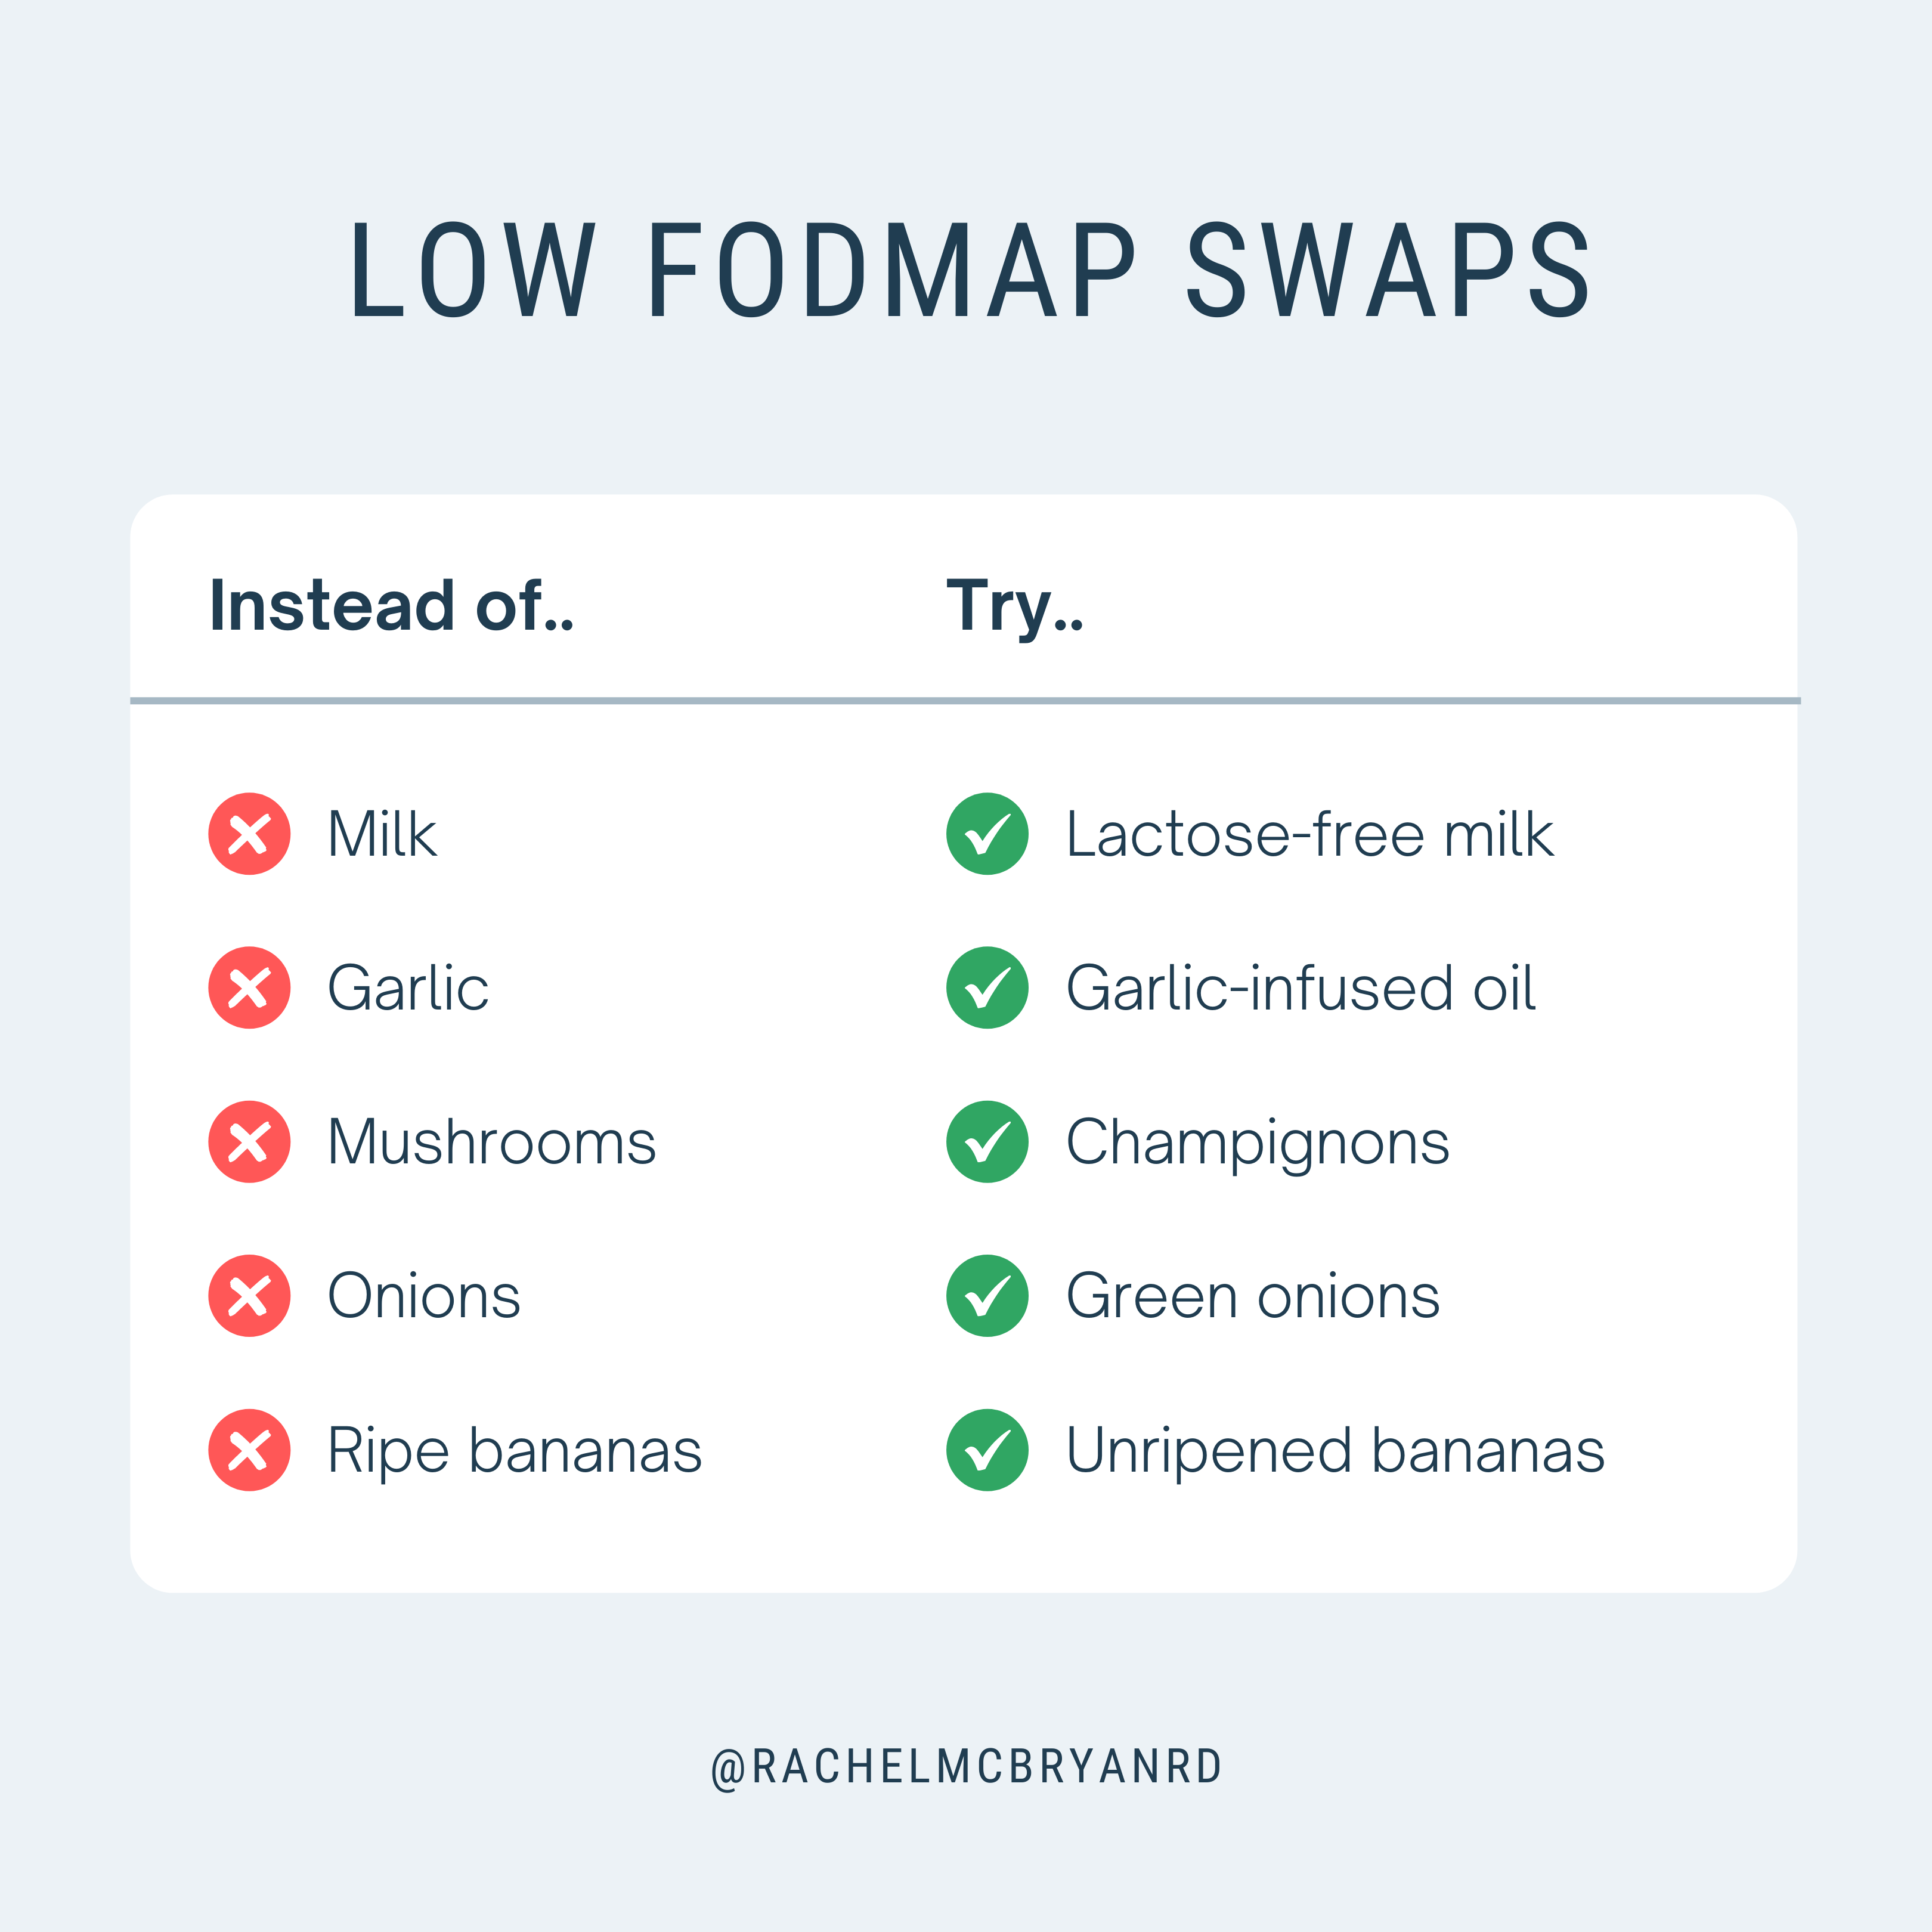 Some low FODMAP swaps that can help reduce symptoms of IBS and other GI conditions.